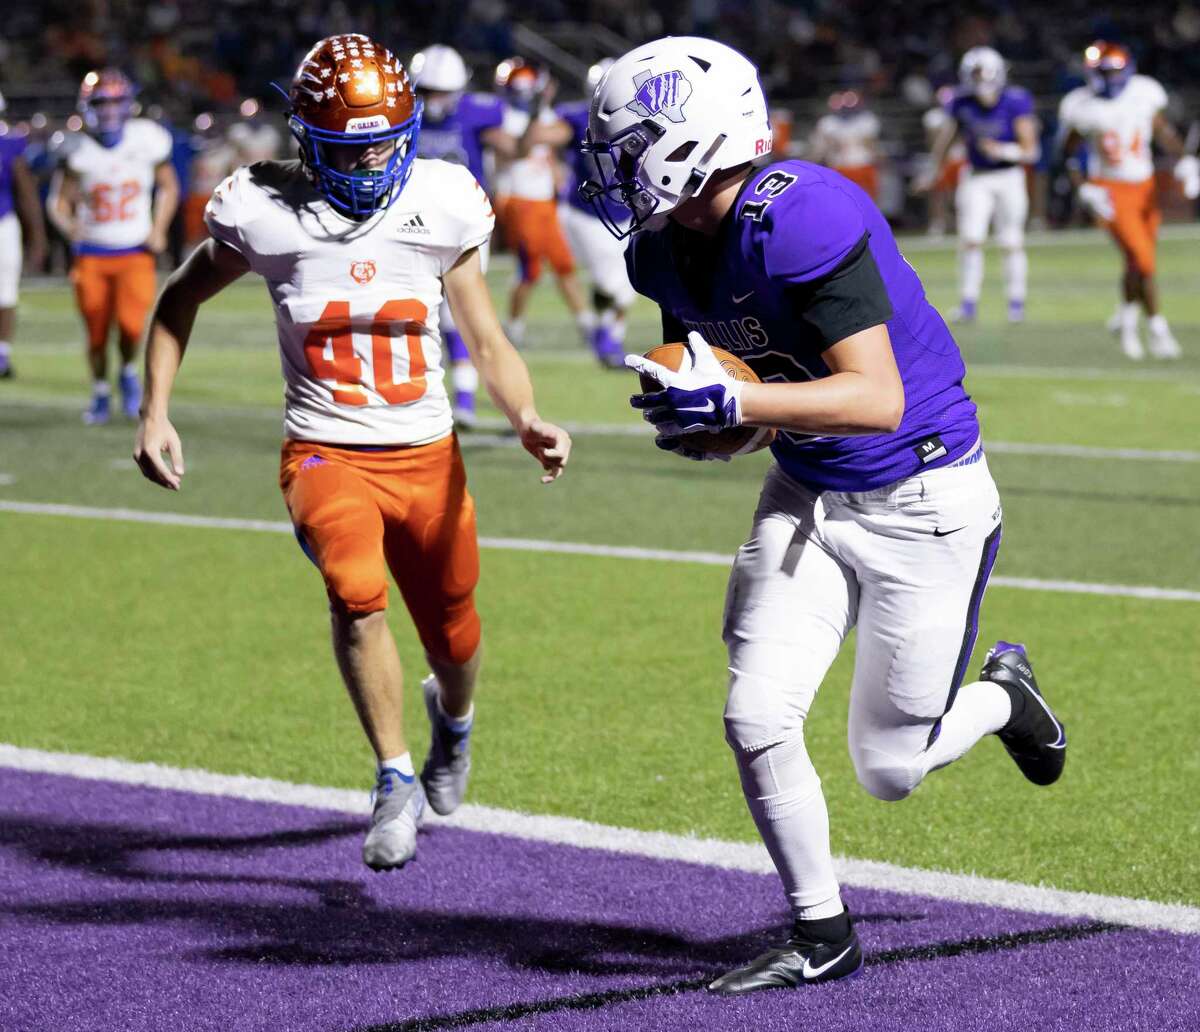 Willis halfback Kory Ford (13) scores a touchdown despite pressure from Grand Oaks linebacker Brayden Bradley (40) during the second quarter of a District 13-6A football game at Berton A. Yates Stadium in Willis on Friday, Nov. 20, 2020.